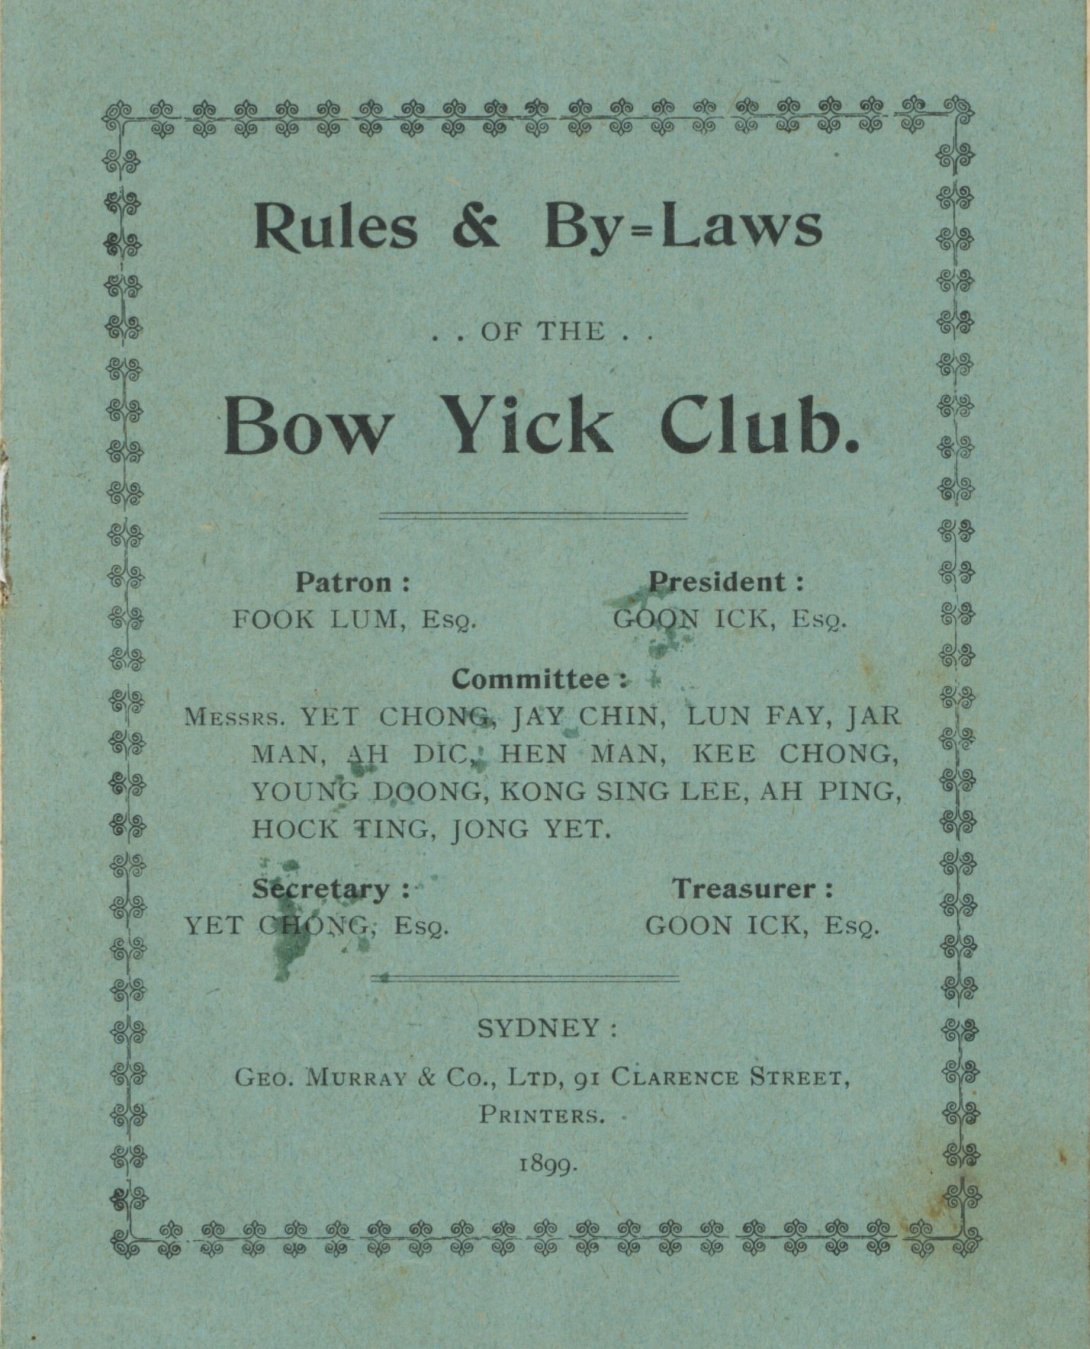 Rules & By-Laws of the Bow Yick Club, 1899 nla.obj-1710433206 